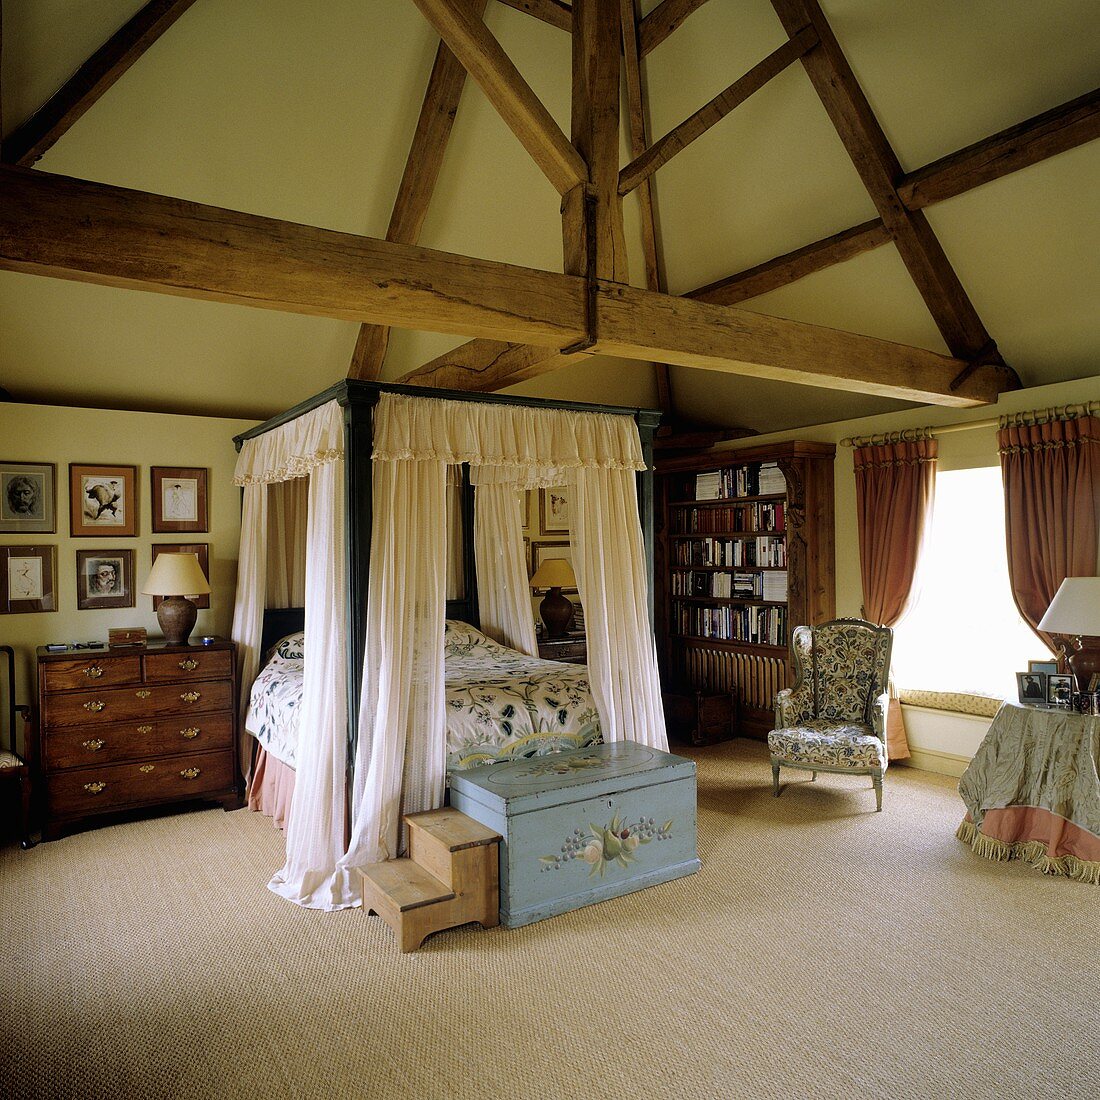 A four poster bed in the attic of a country house with rustic wood beams